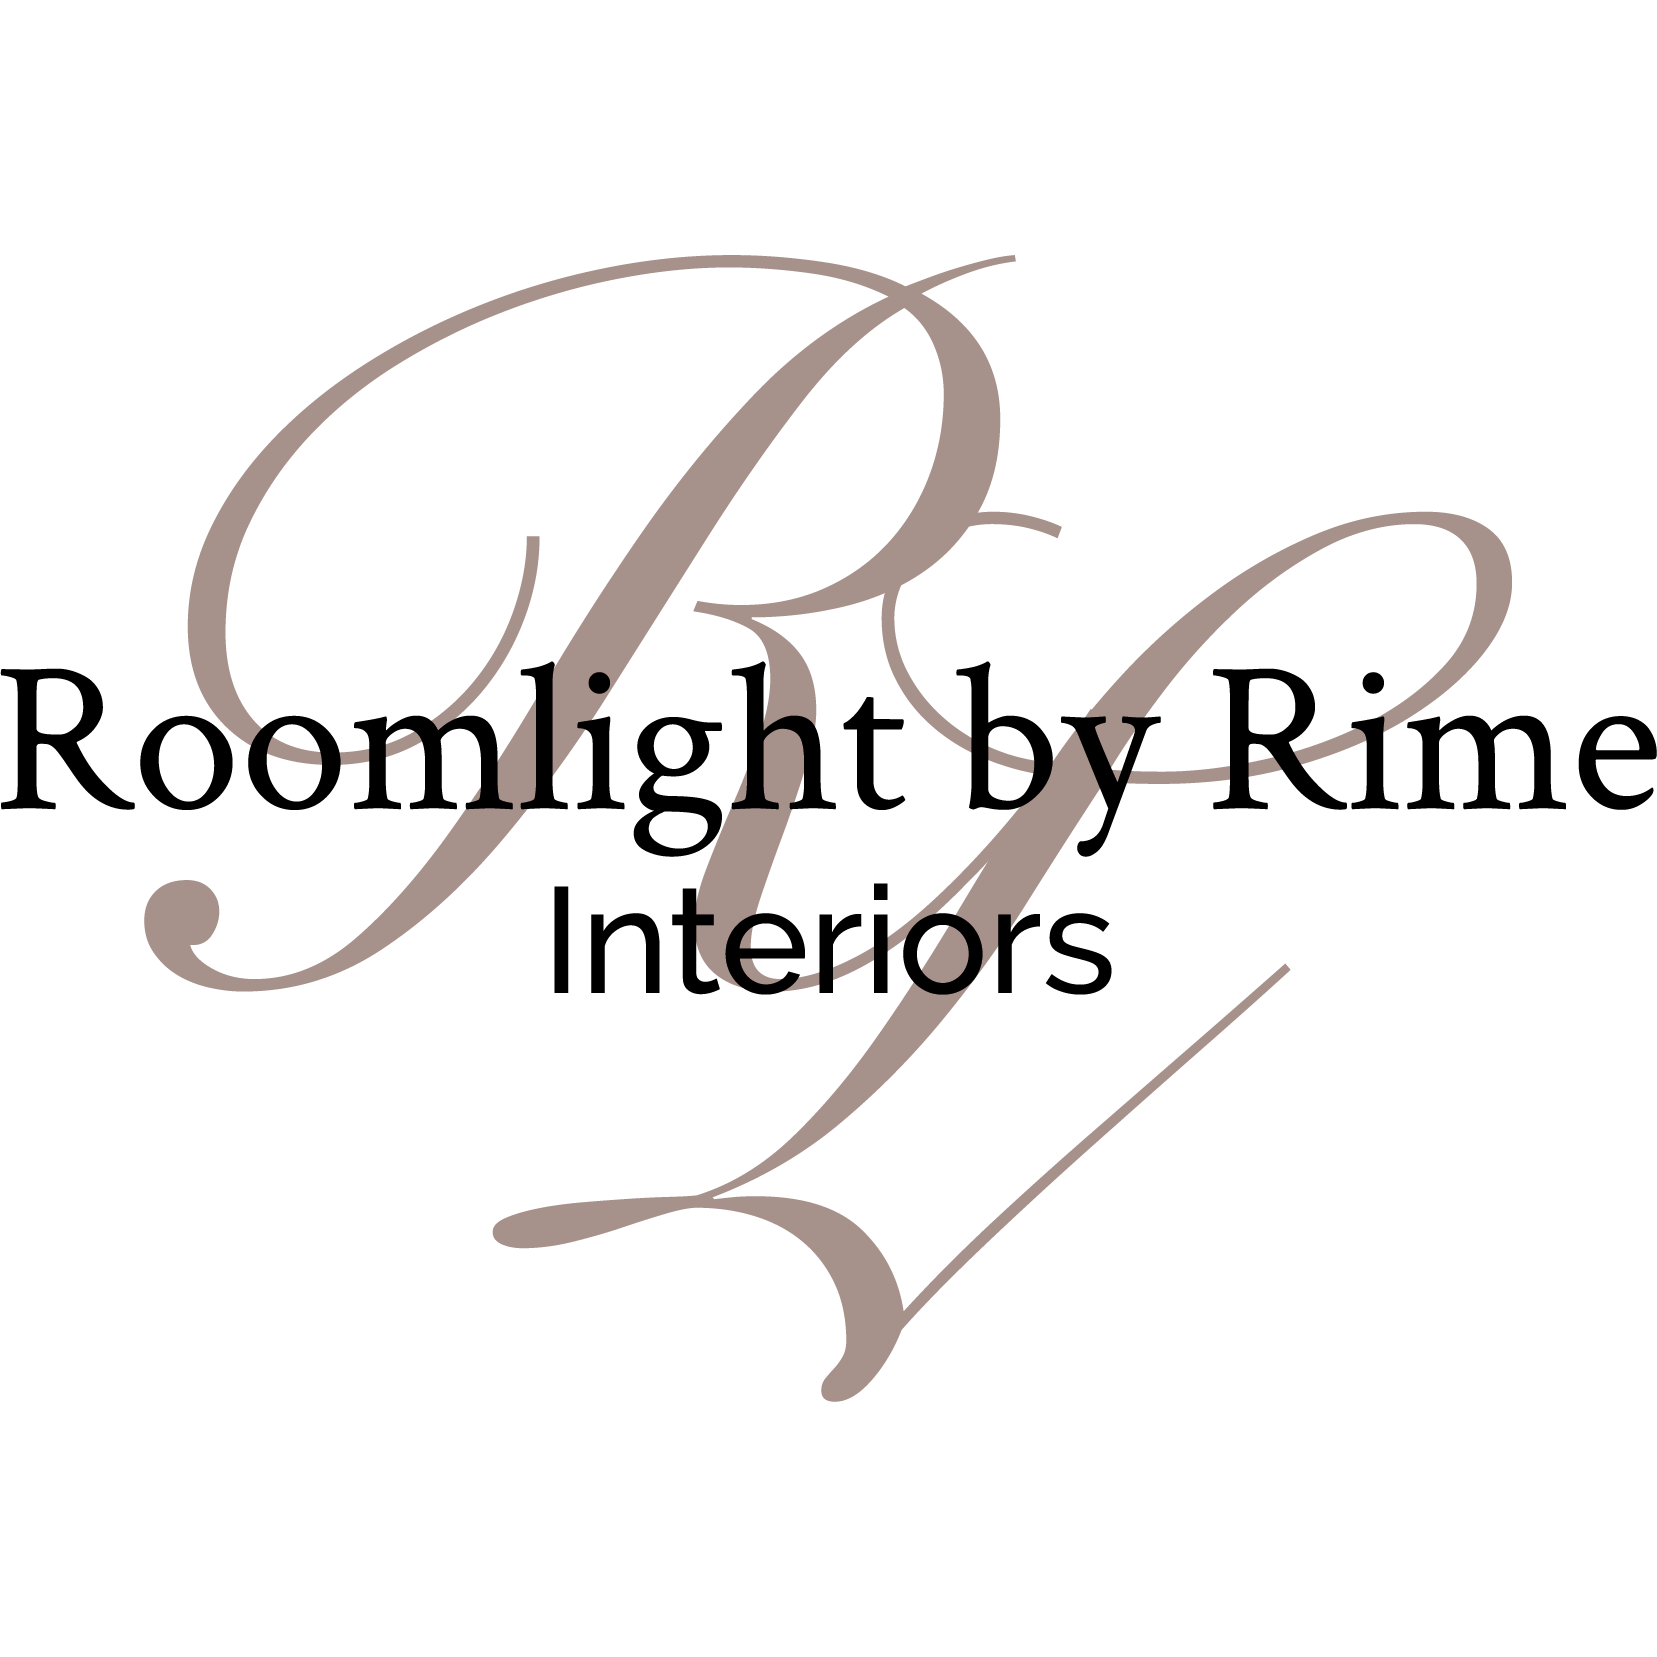 Roomlight by Rime Interiors Logo